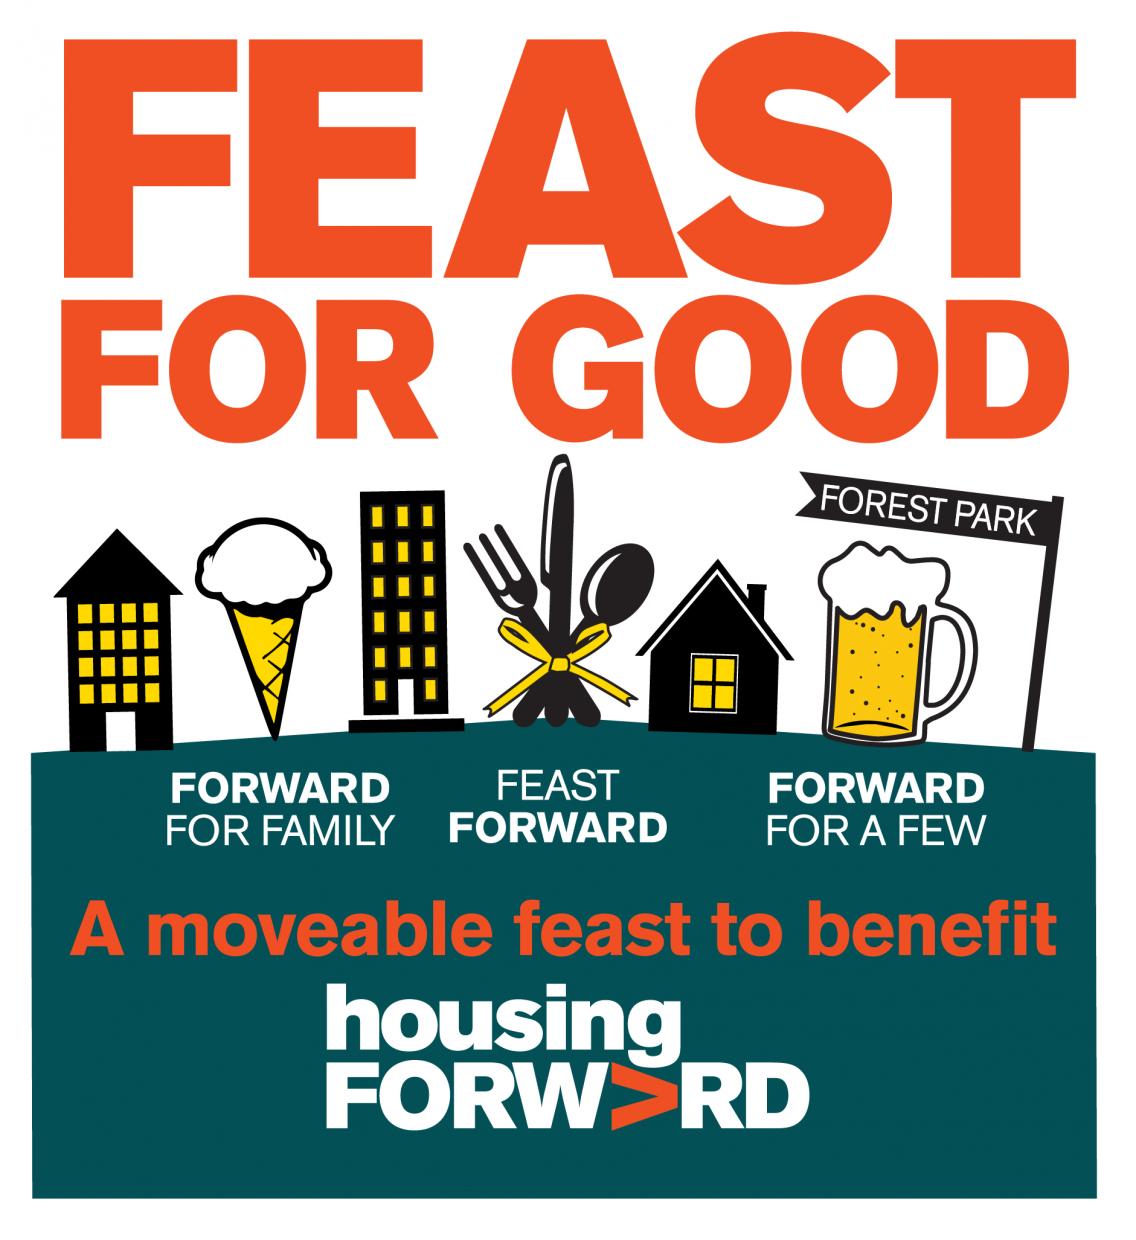 Don't Miss Our New Progressive Dinner: FEAST FOR GOOD